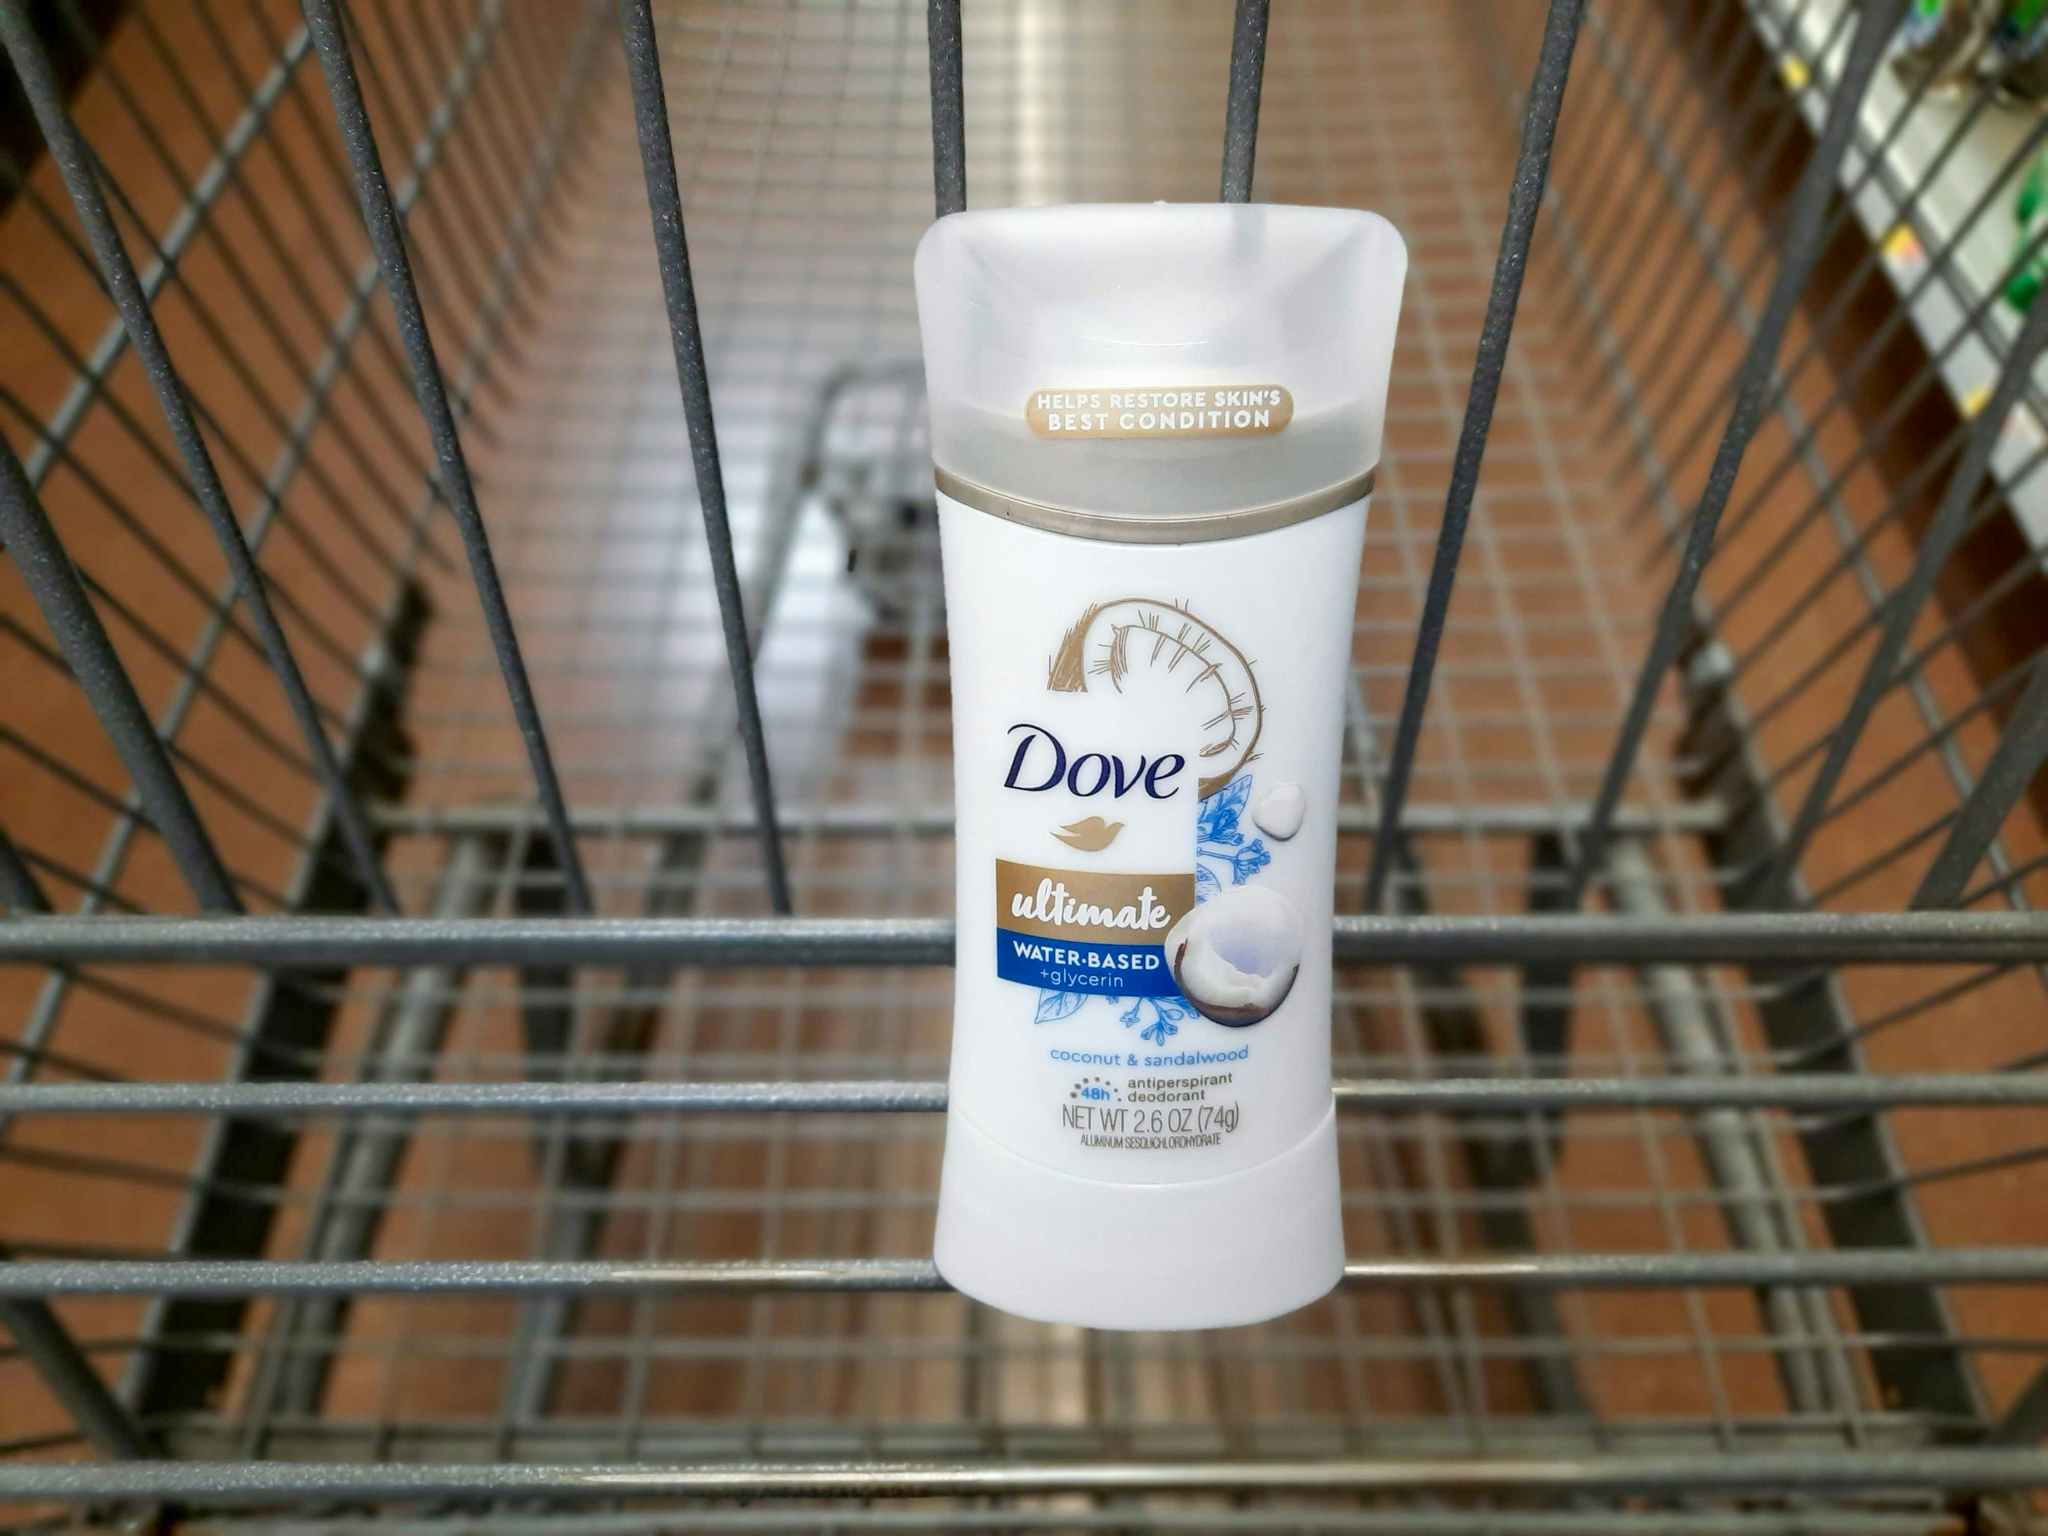 One Dove Ultimate Deodorant product in Walmart shopping cart